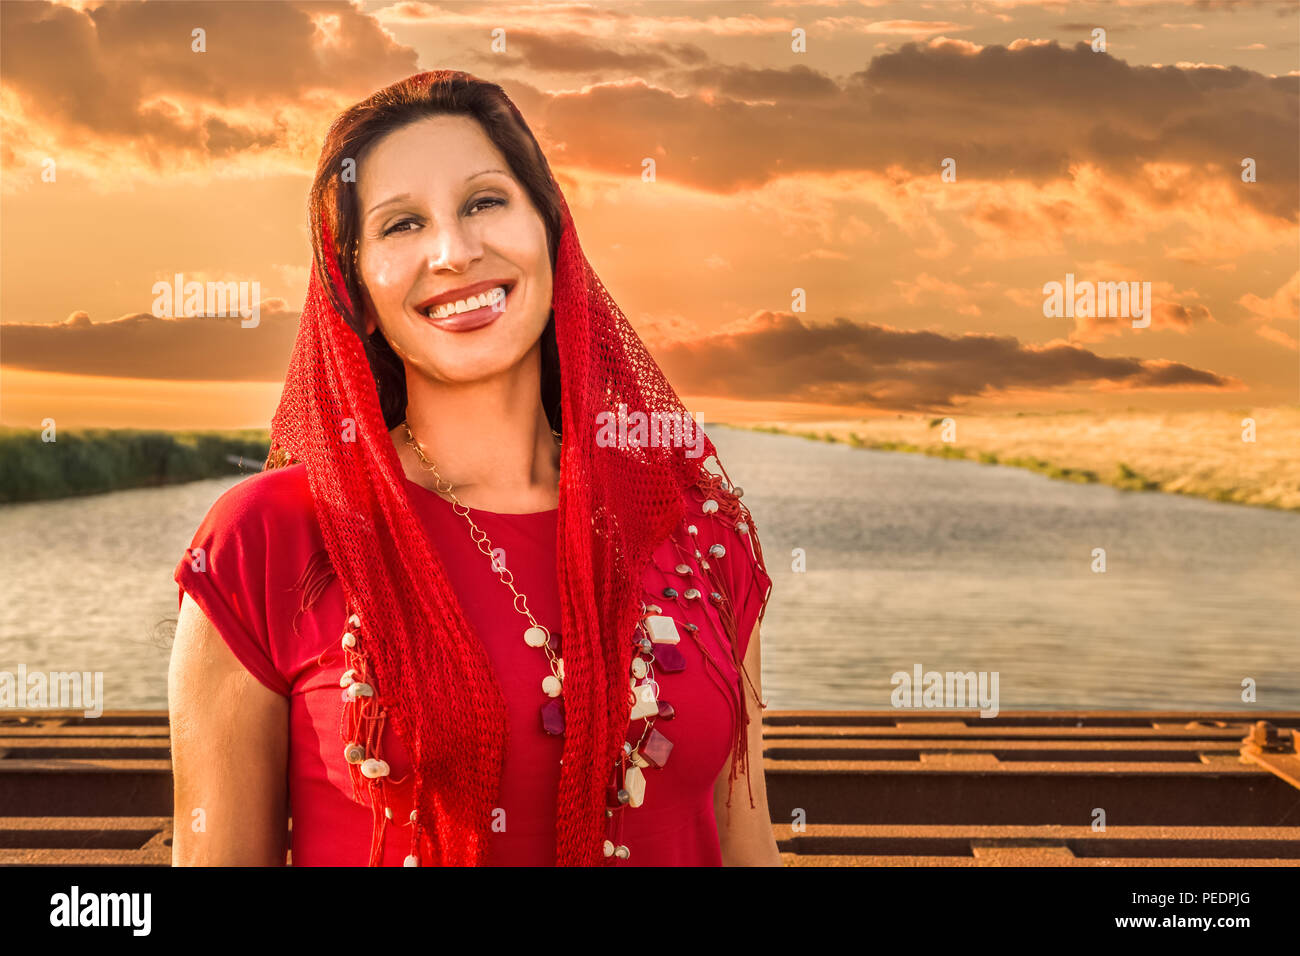 Mediterranean woman wearing red headscarf and smiling on river background Stock Photo